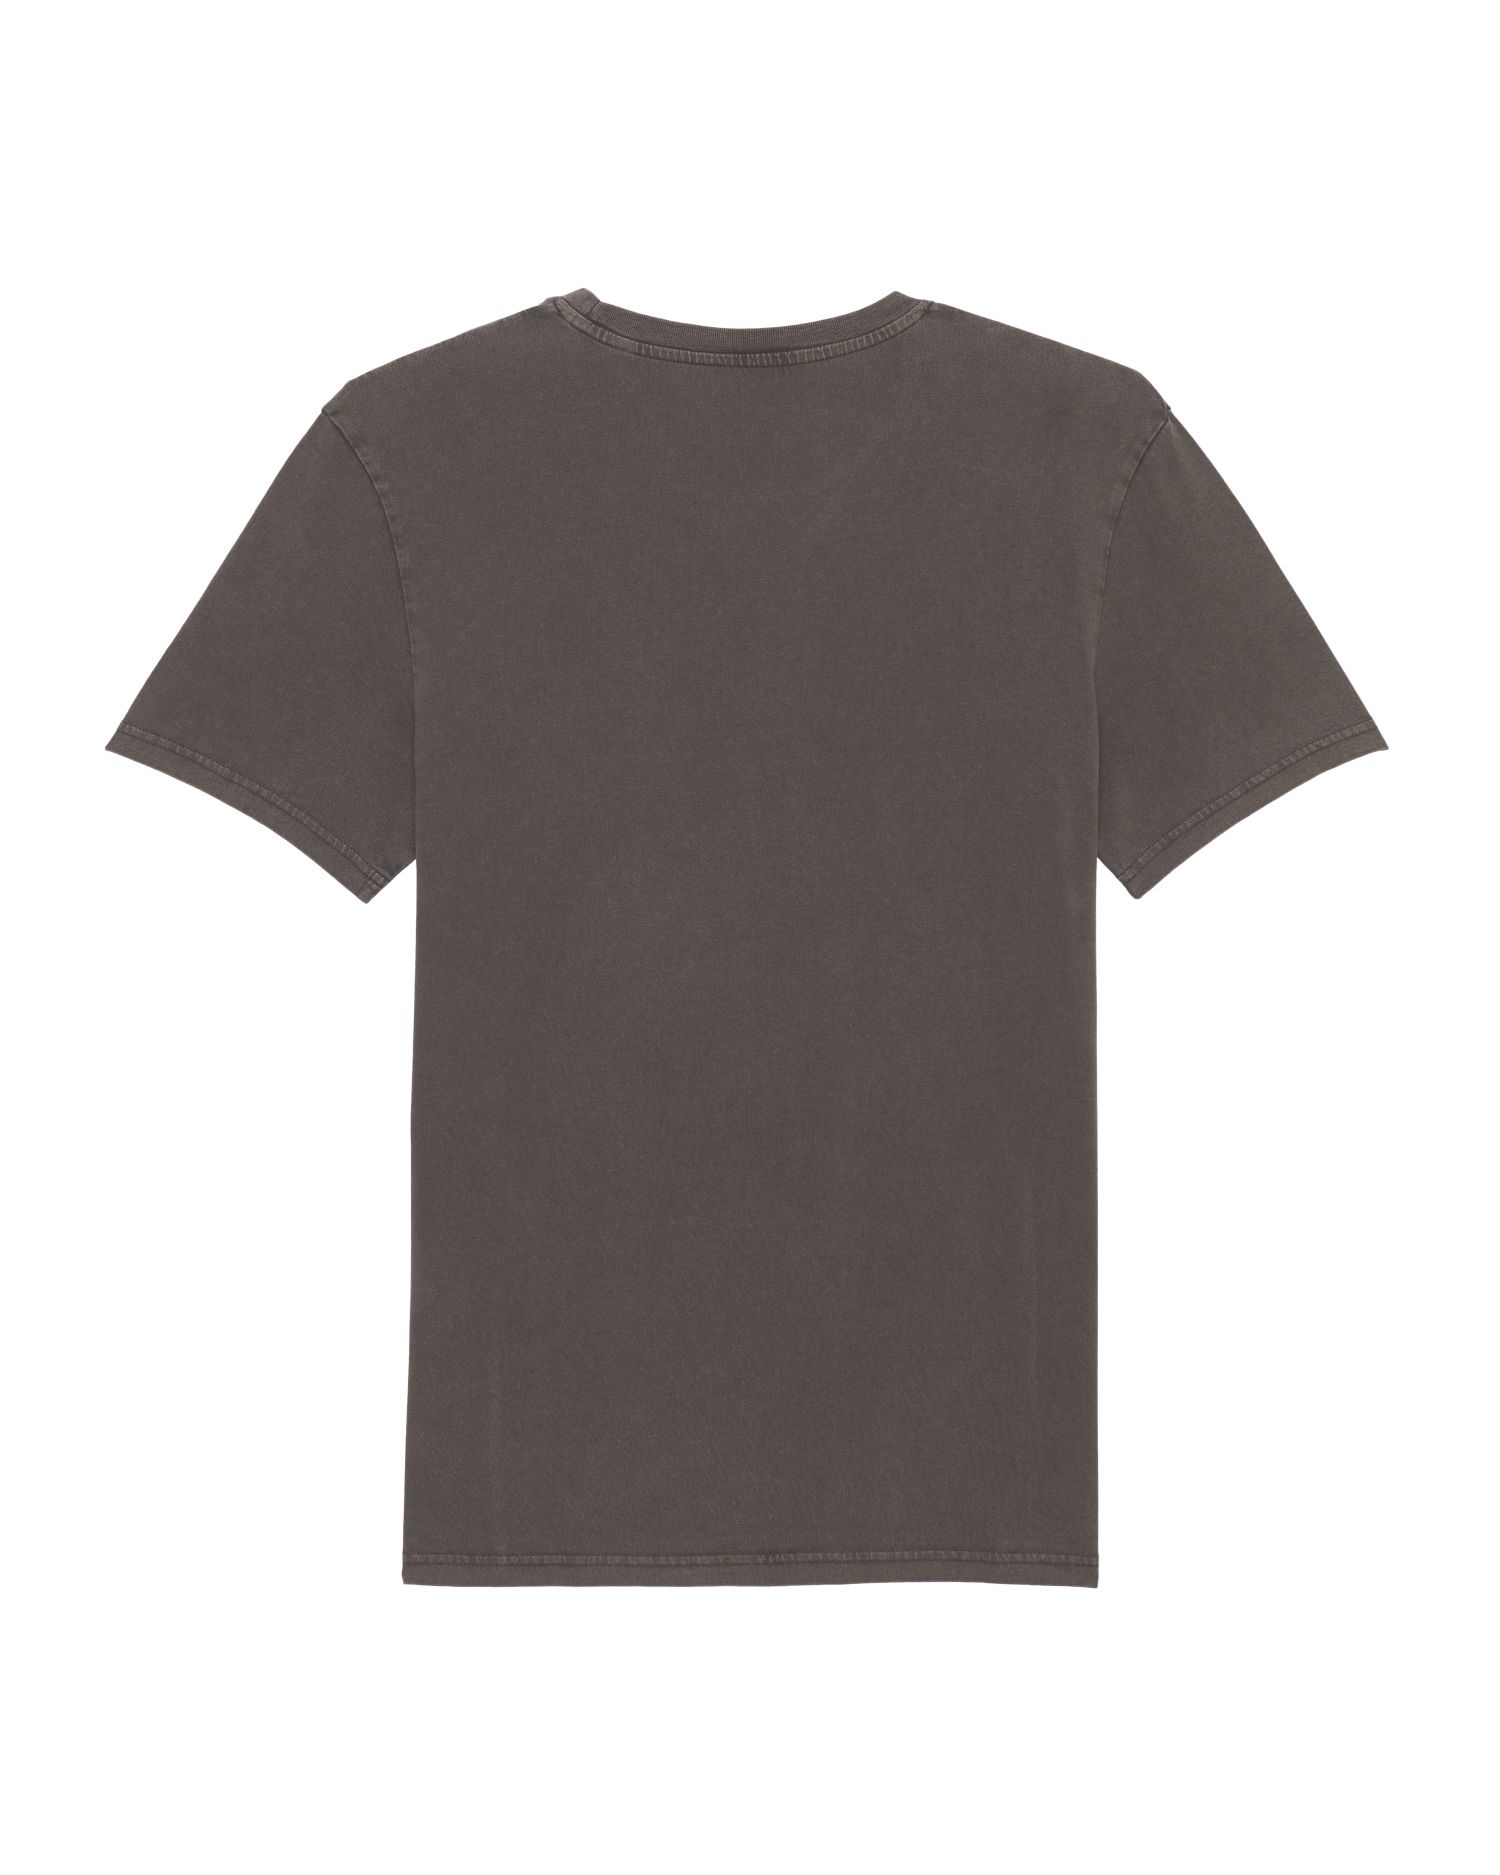 T-Shirt Creator Vintage in Farbe G. Dyed Aged Deep Chocolate